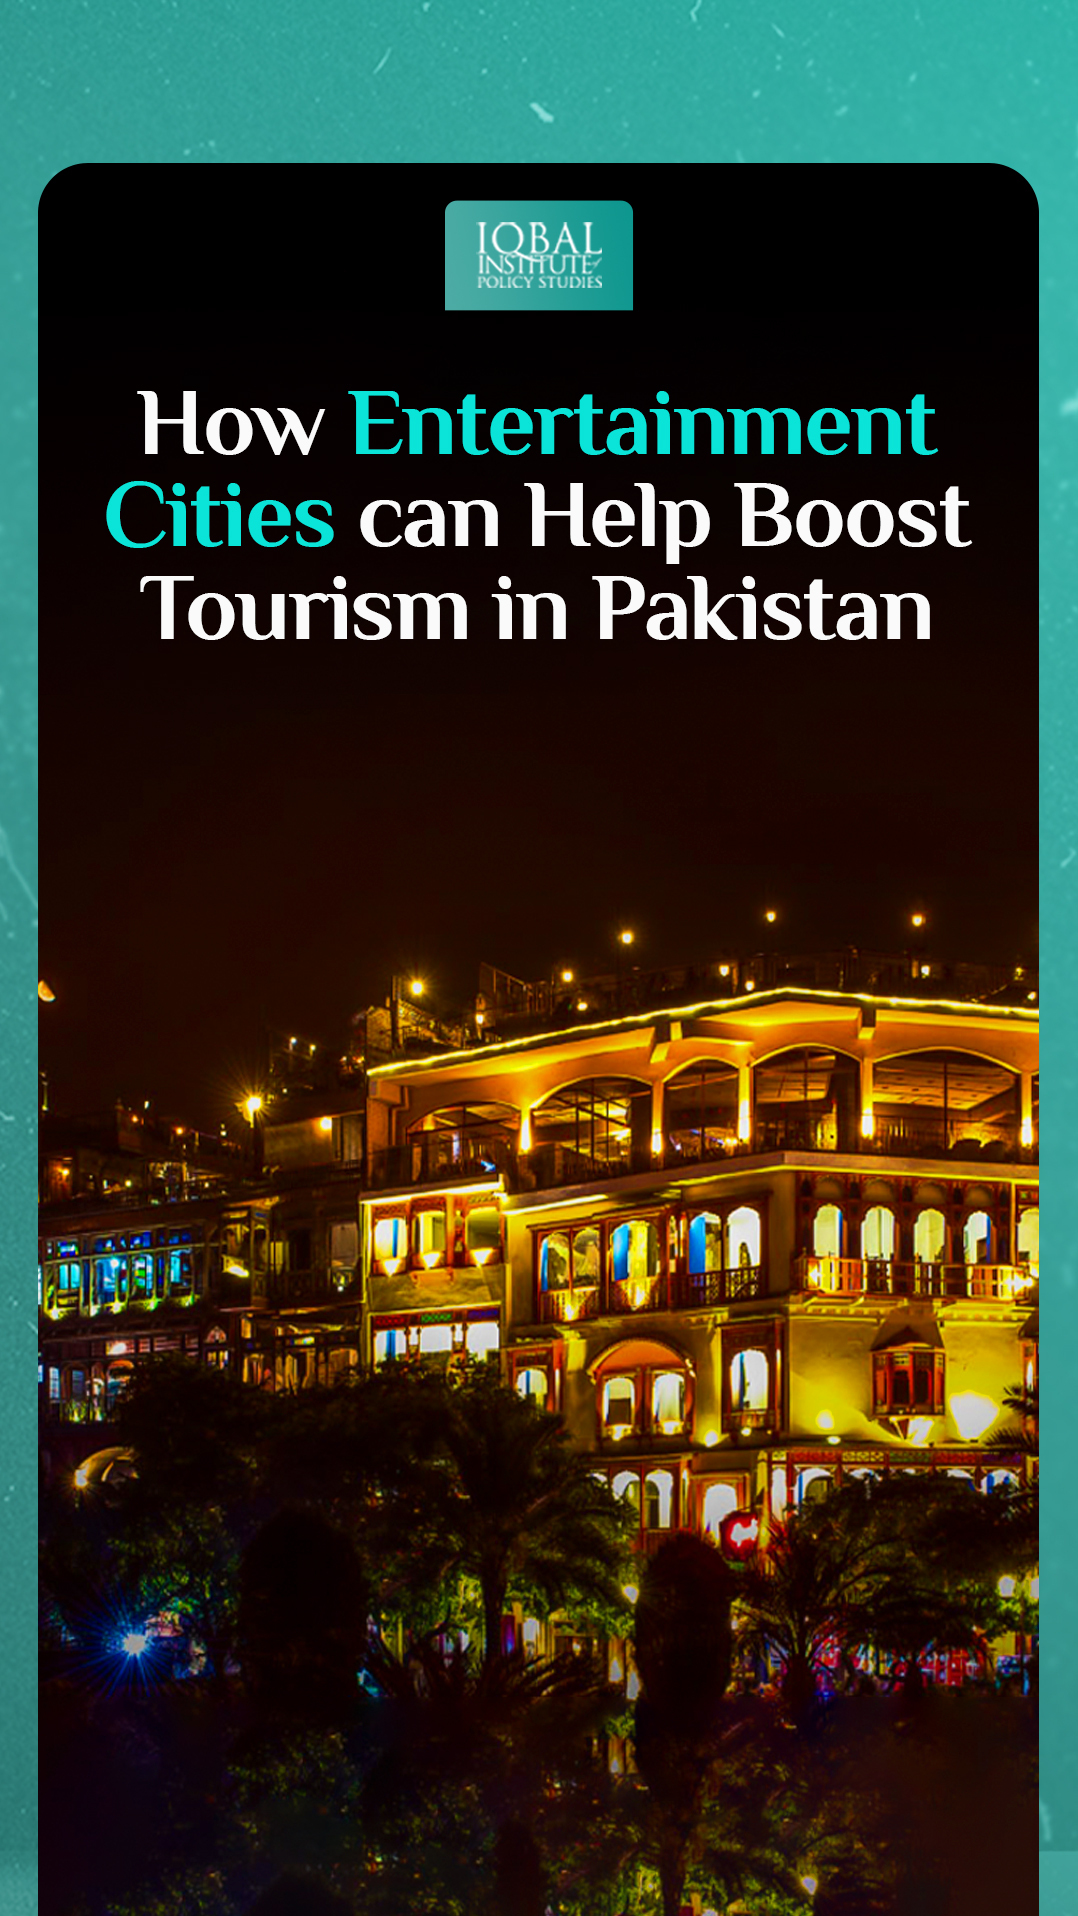 How Entertainment Cities can Help Boost Tourism in Pakistan